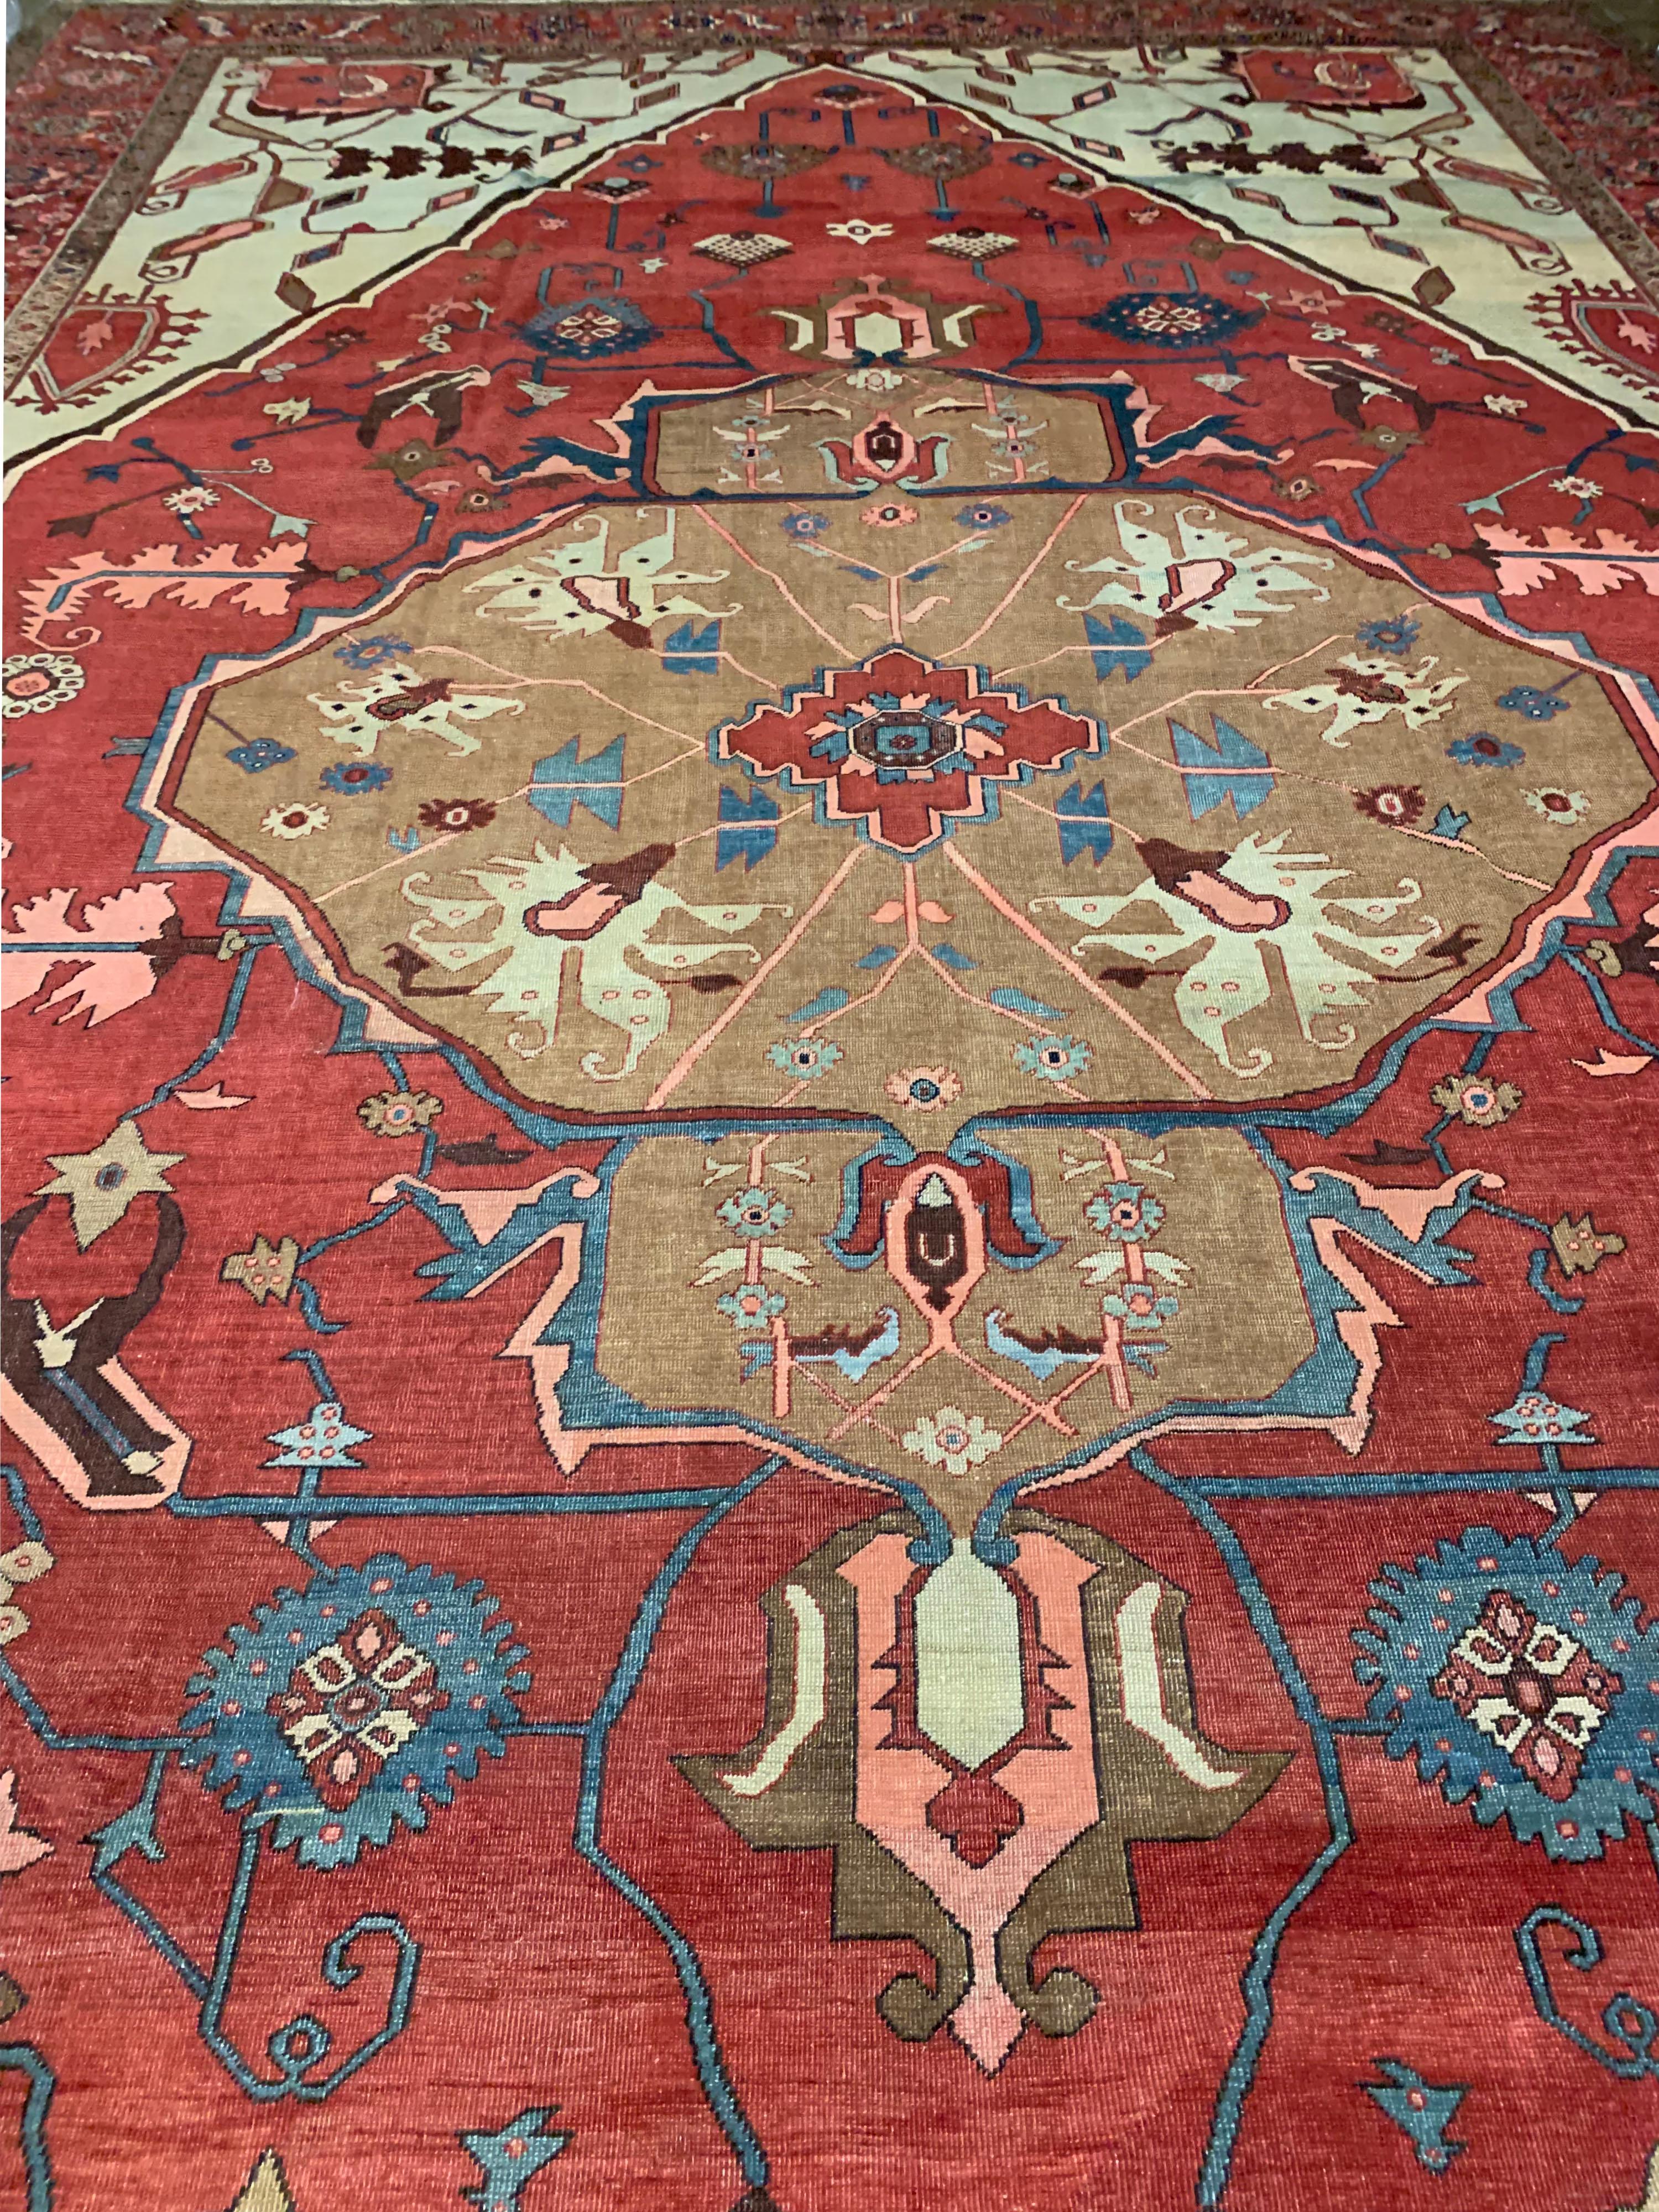 Antique Oversize Persian Heriz Serapi rug, 11'5 x 18'3. Serapi carpets are a quality designation for Heriz pieces of a firmer weave, shorter pile and finer quality. There is no village of Serapi among the thirty-odd towns in the Heriz weaving